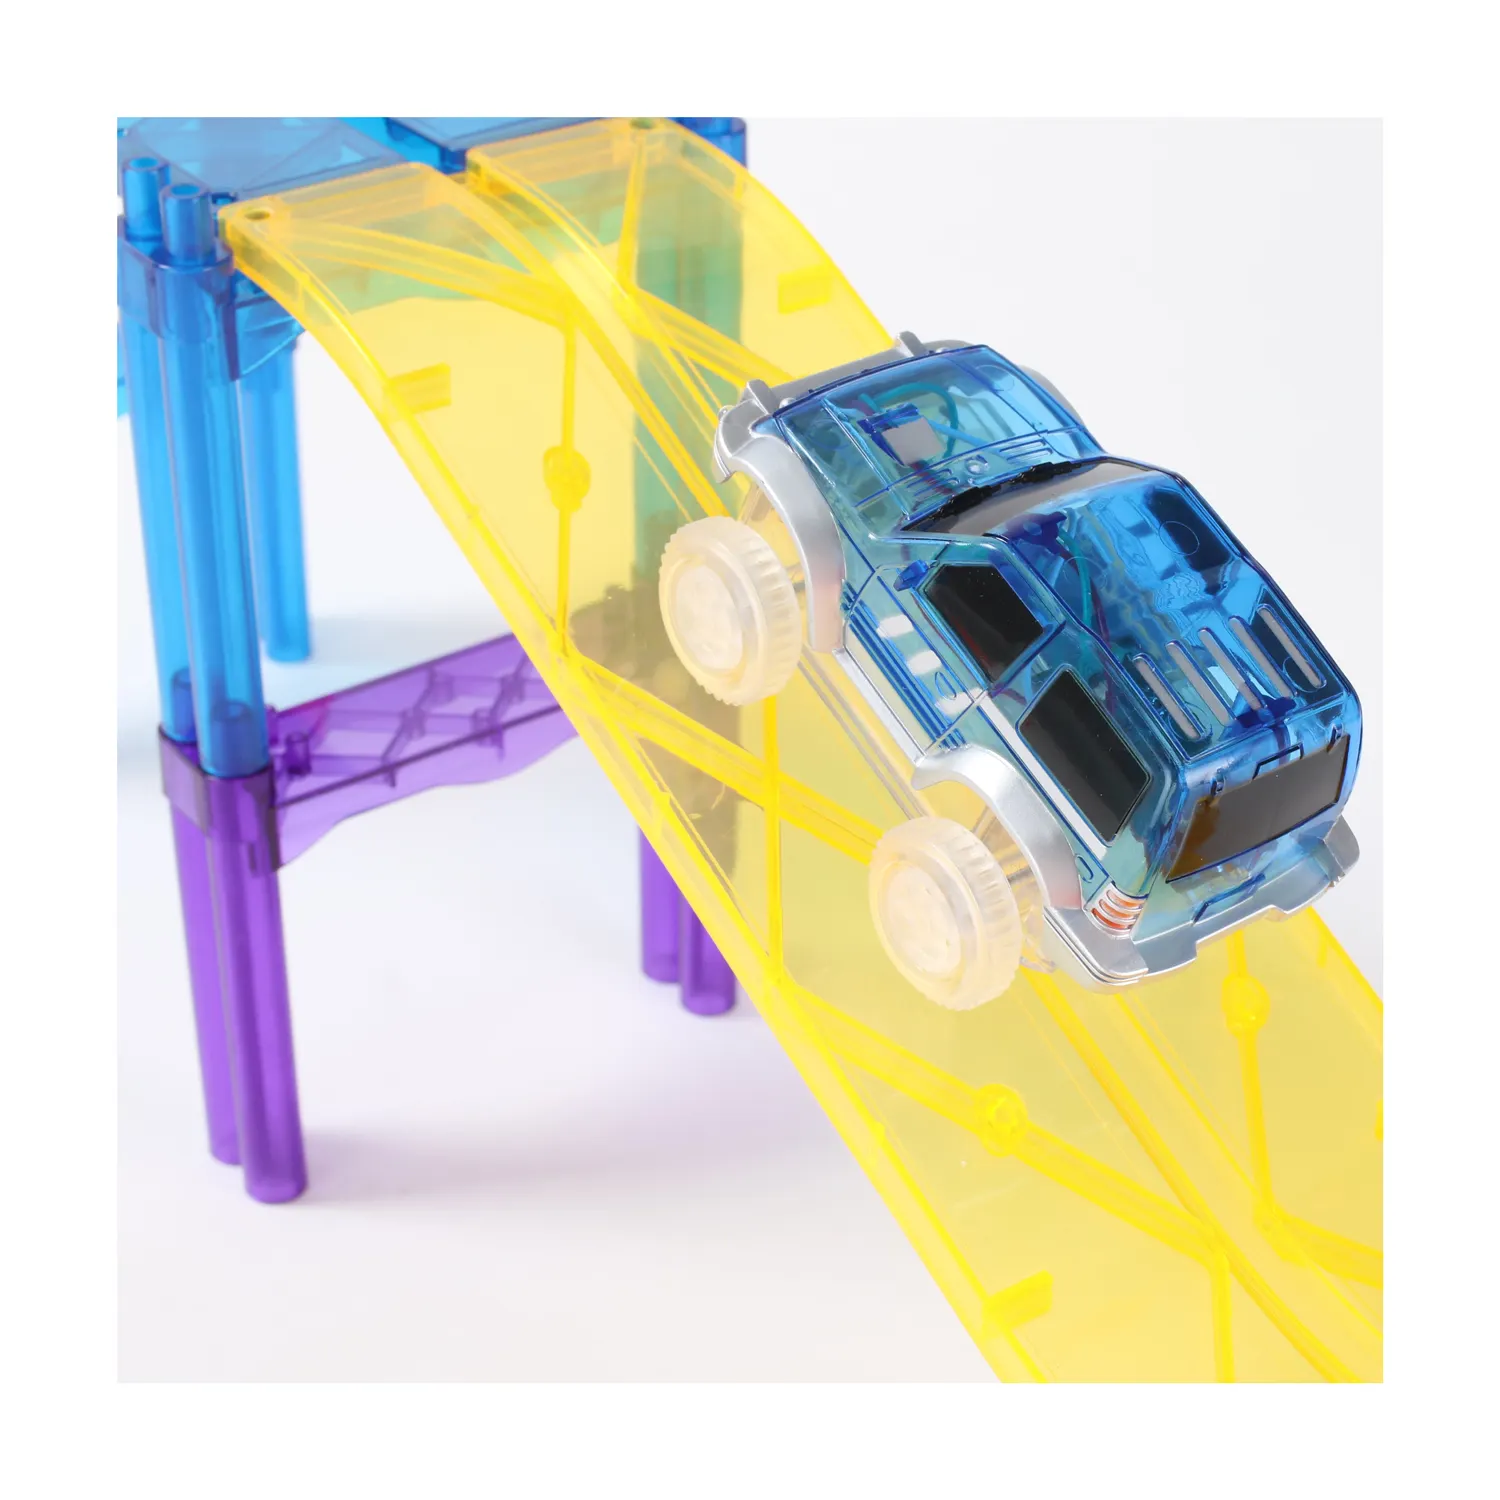 Stem Magnetic Plastic Building Block Toys Car Race Track Marble Run Tile Electric Toy Car For Kids